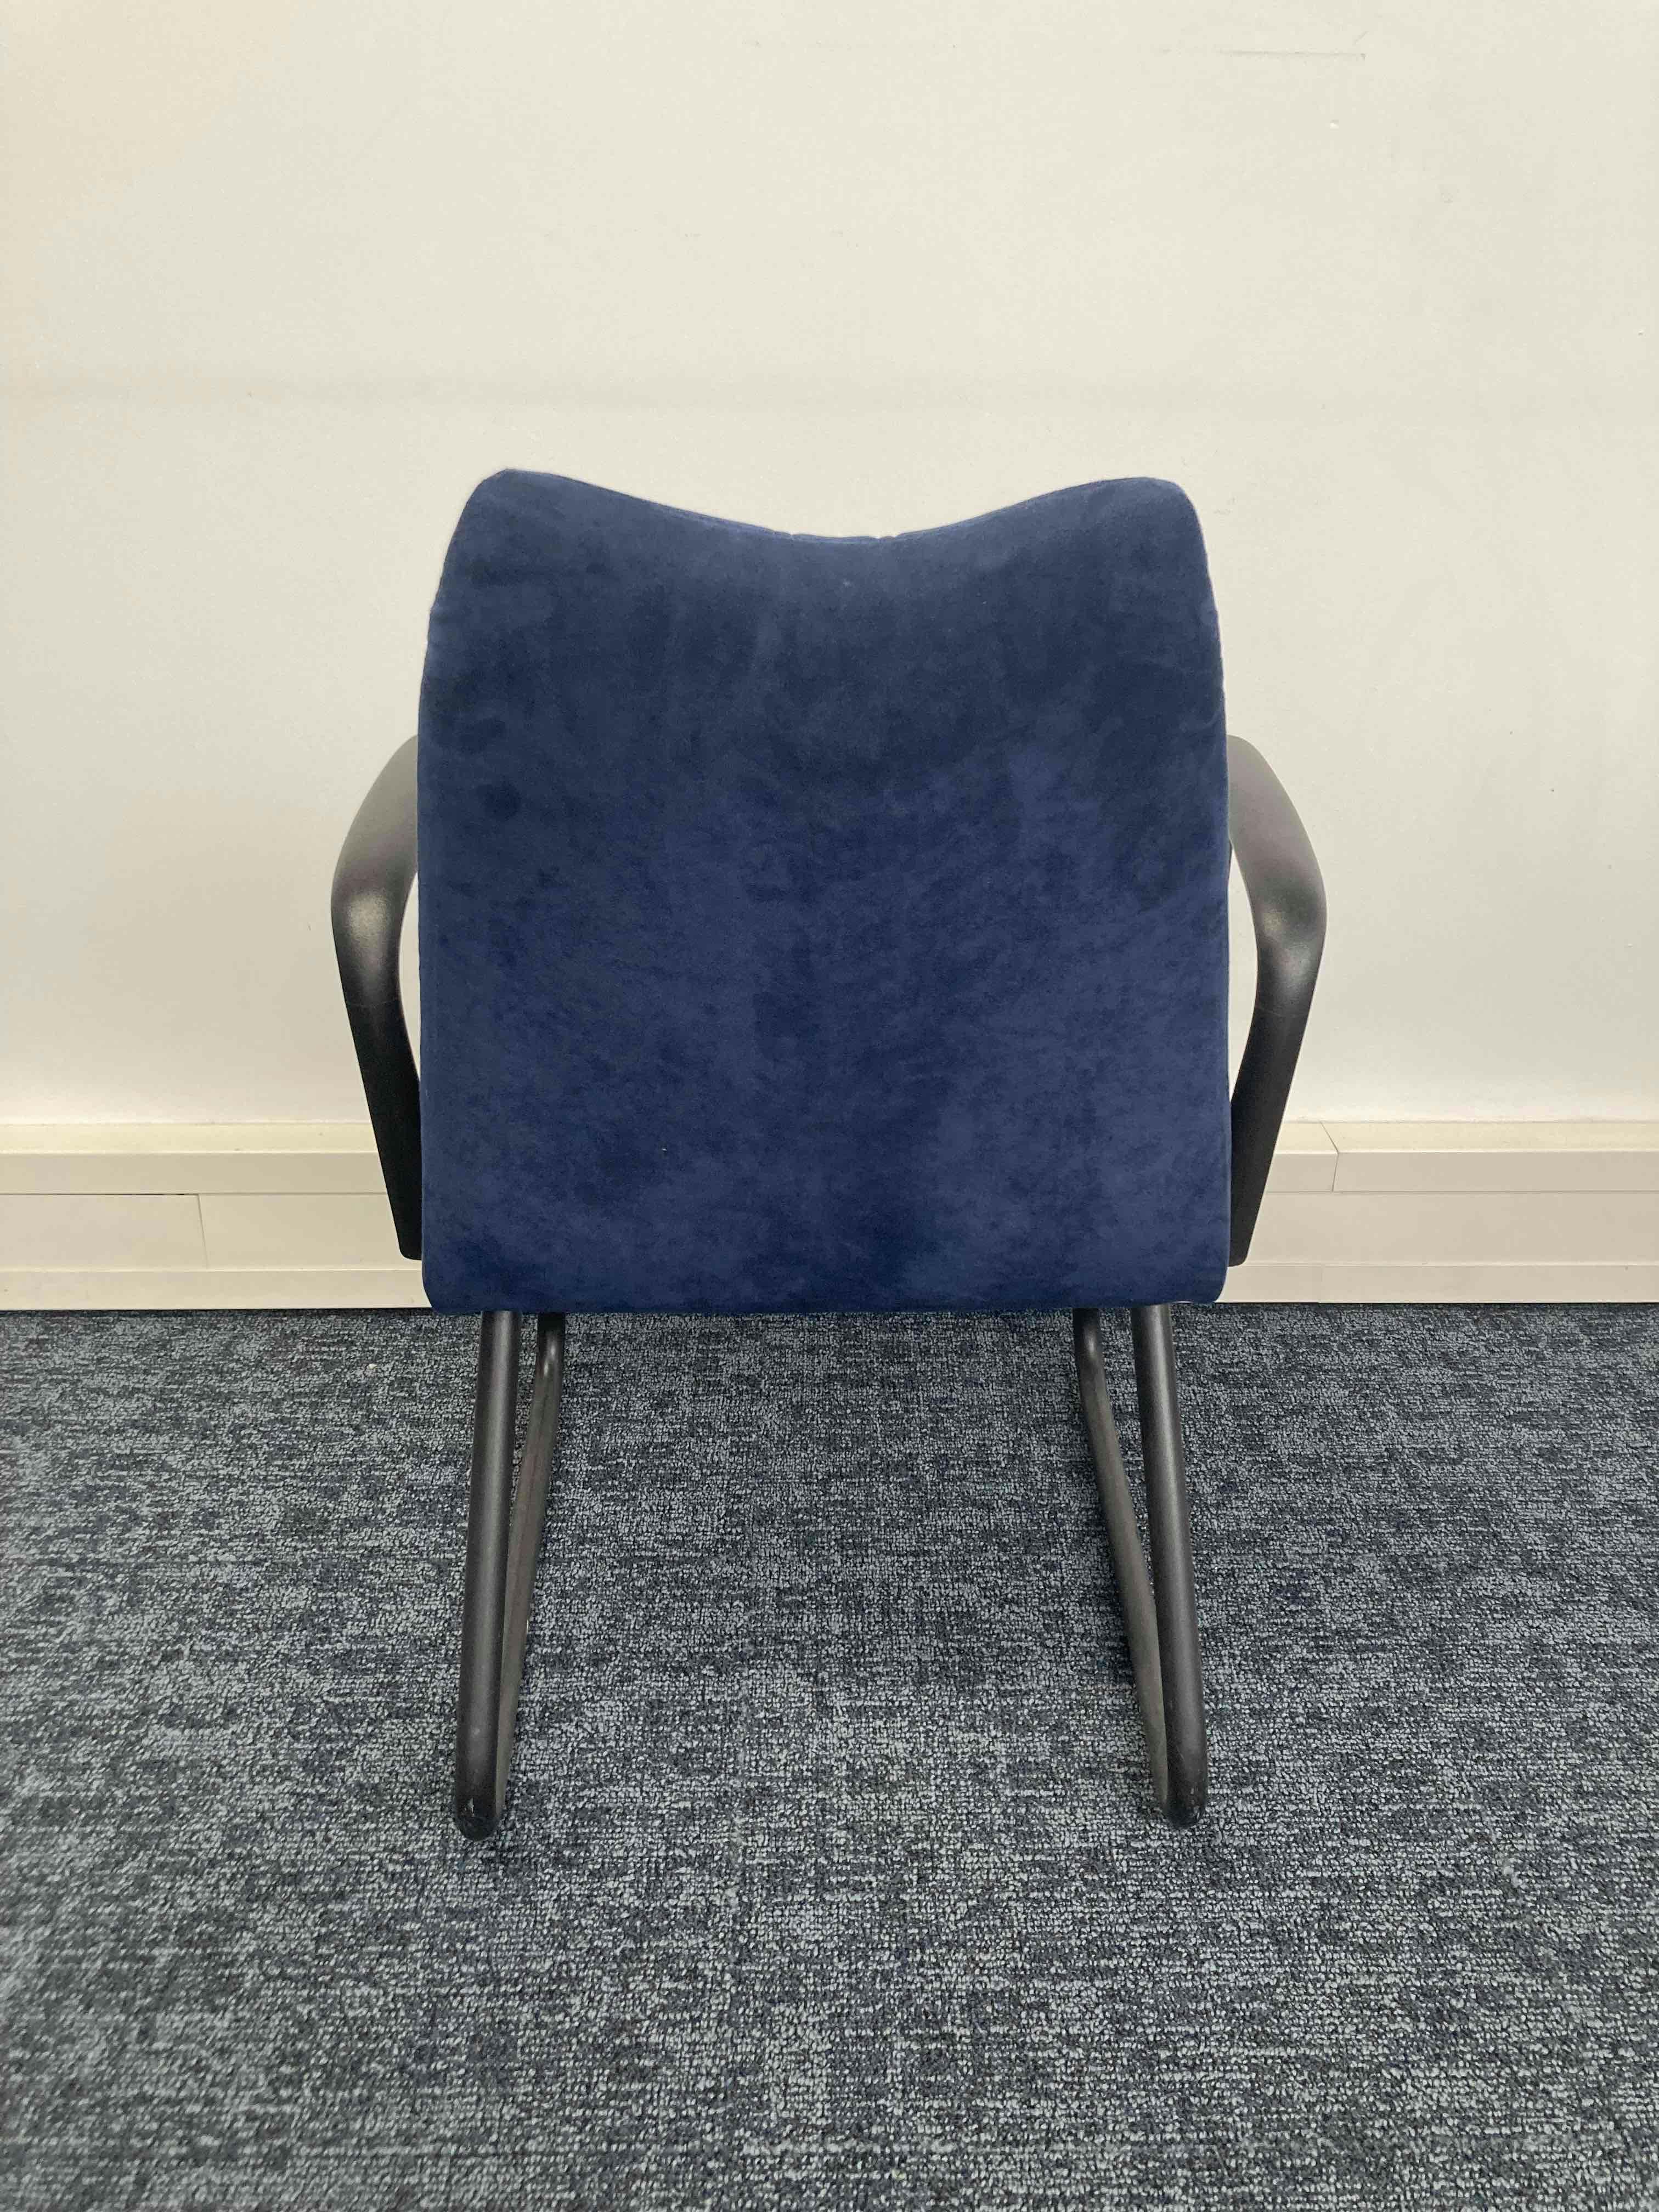 Blue meeting chair - Second hand quality "Chairs" - Relieve Furniture